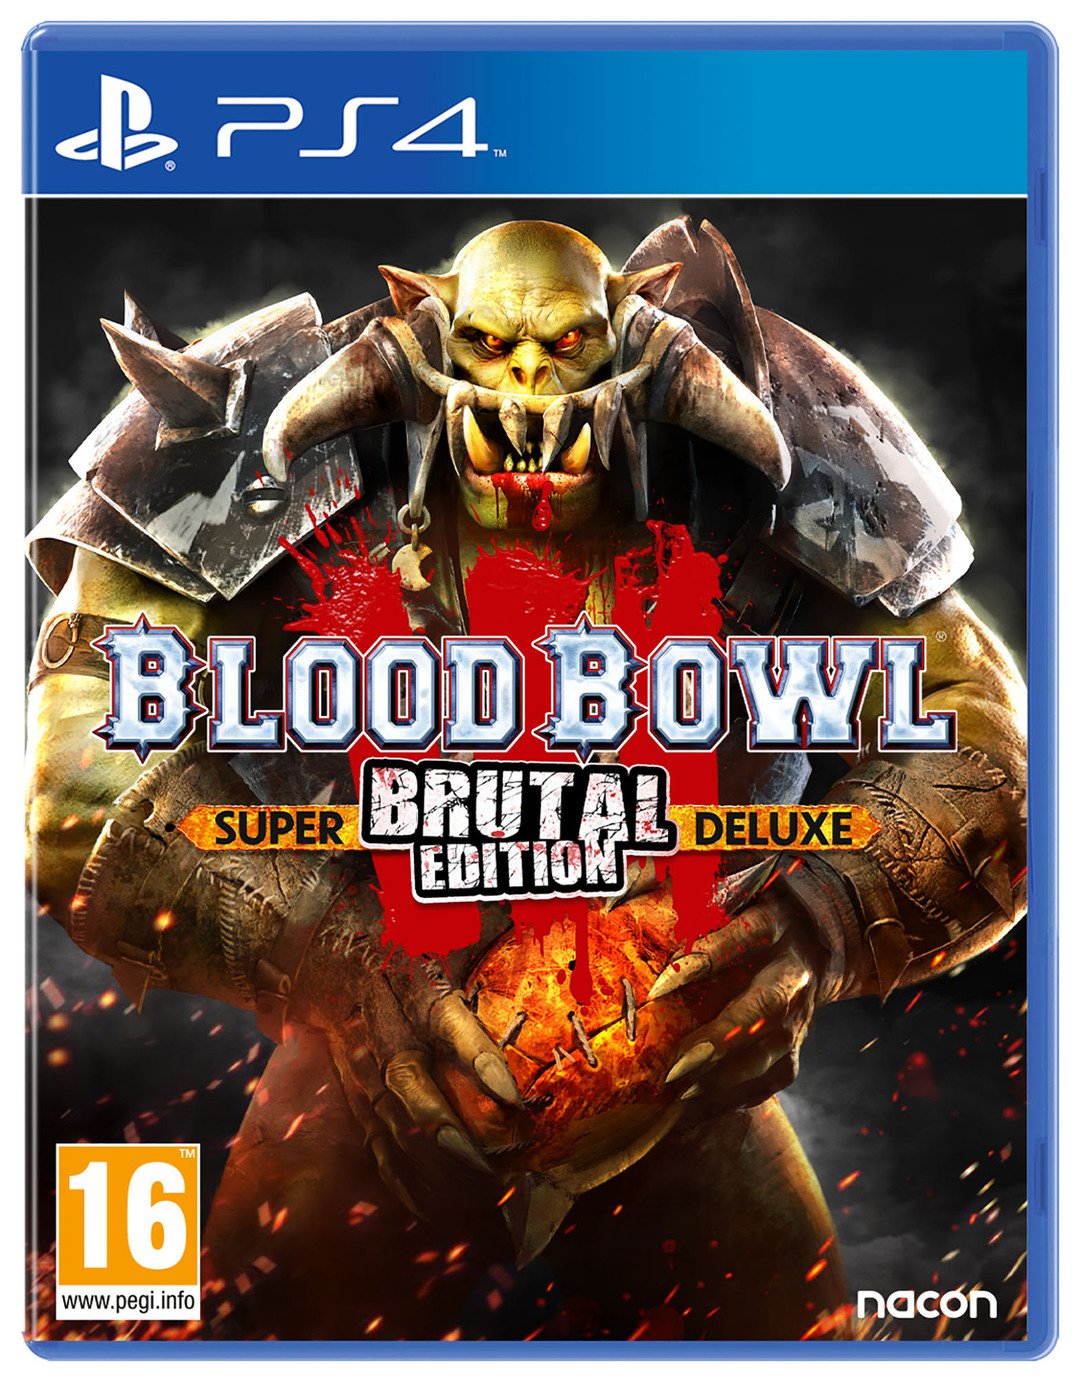 Blood Bowl Super Brutal Deluxe Edition PS4 Game